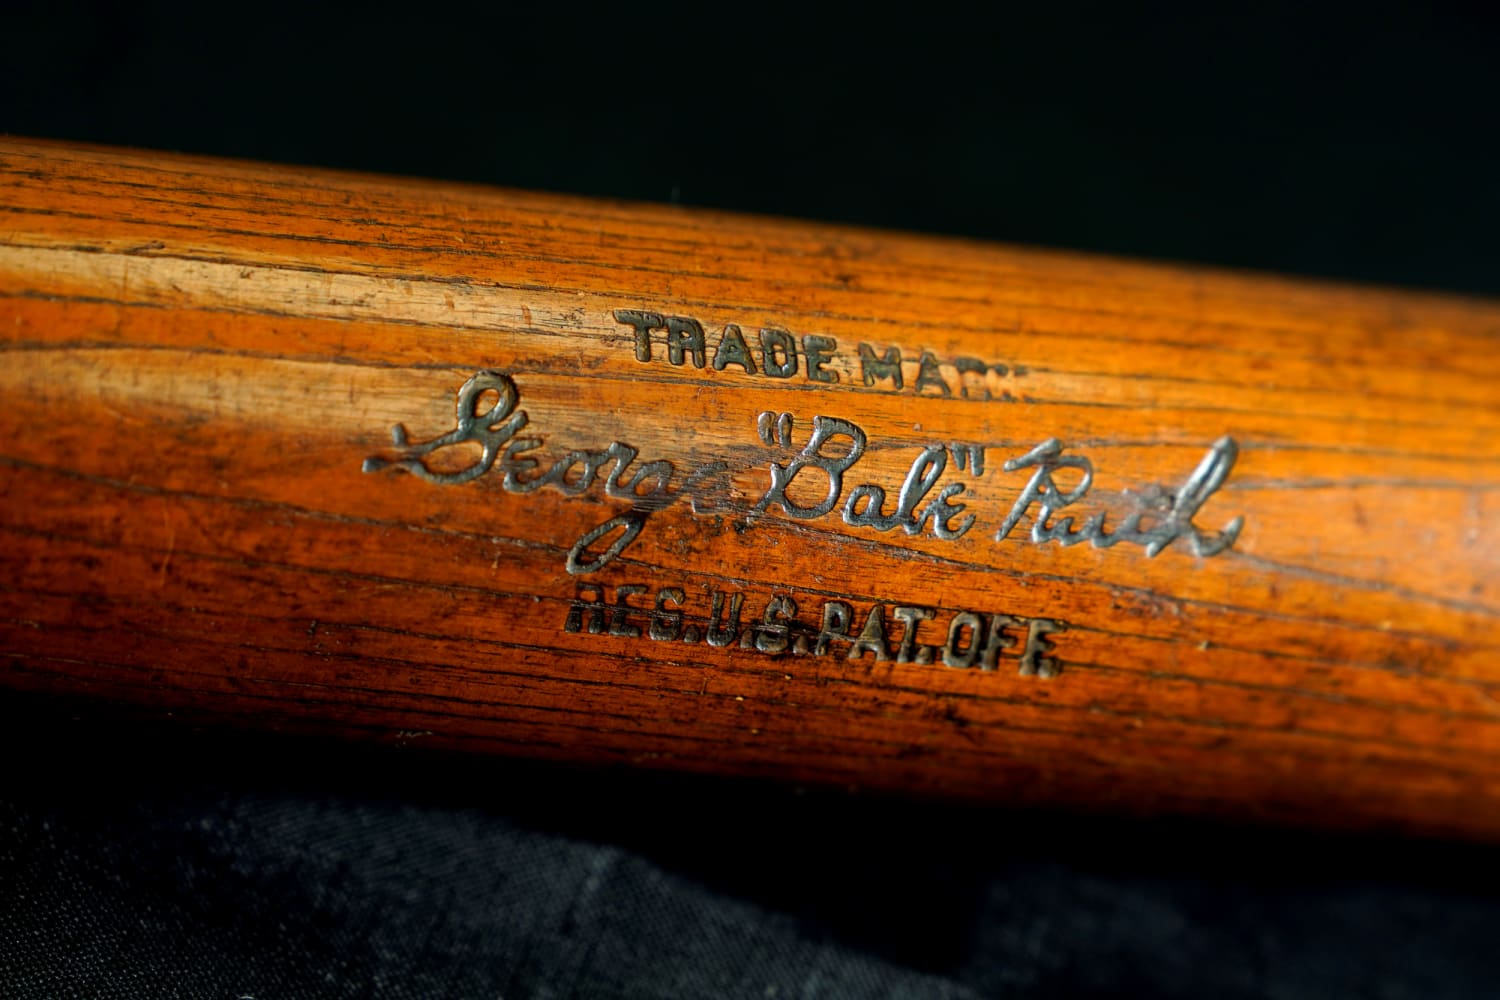 babe ruth auction